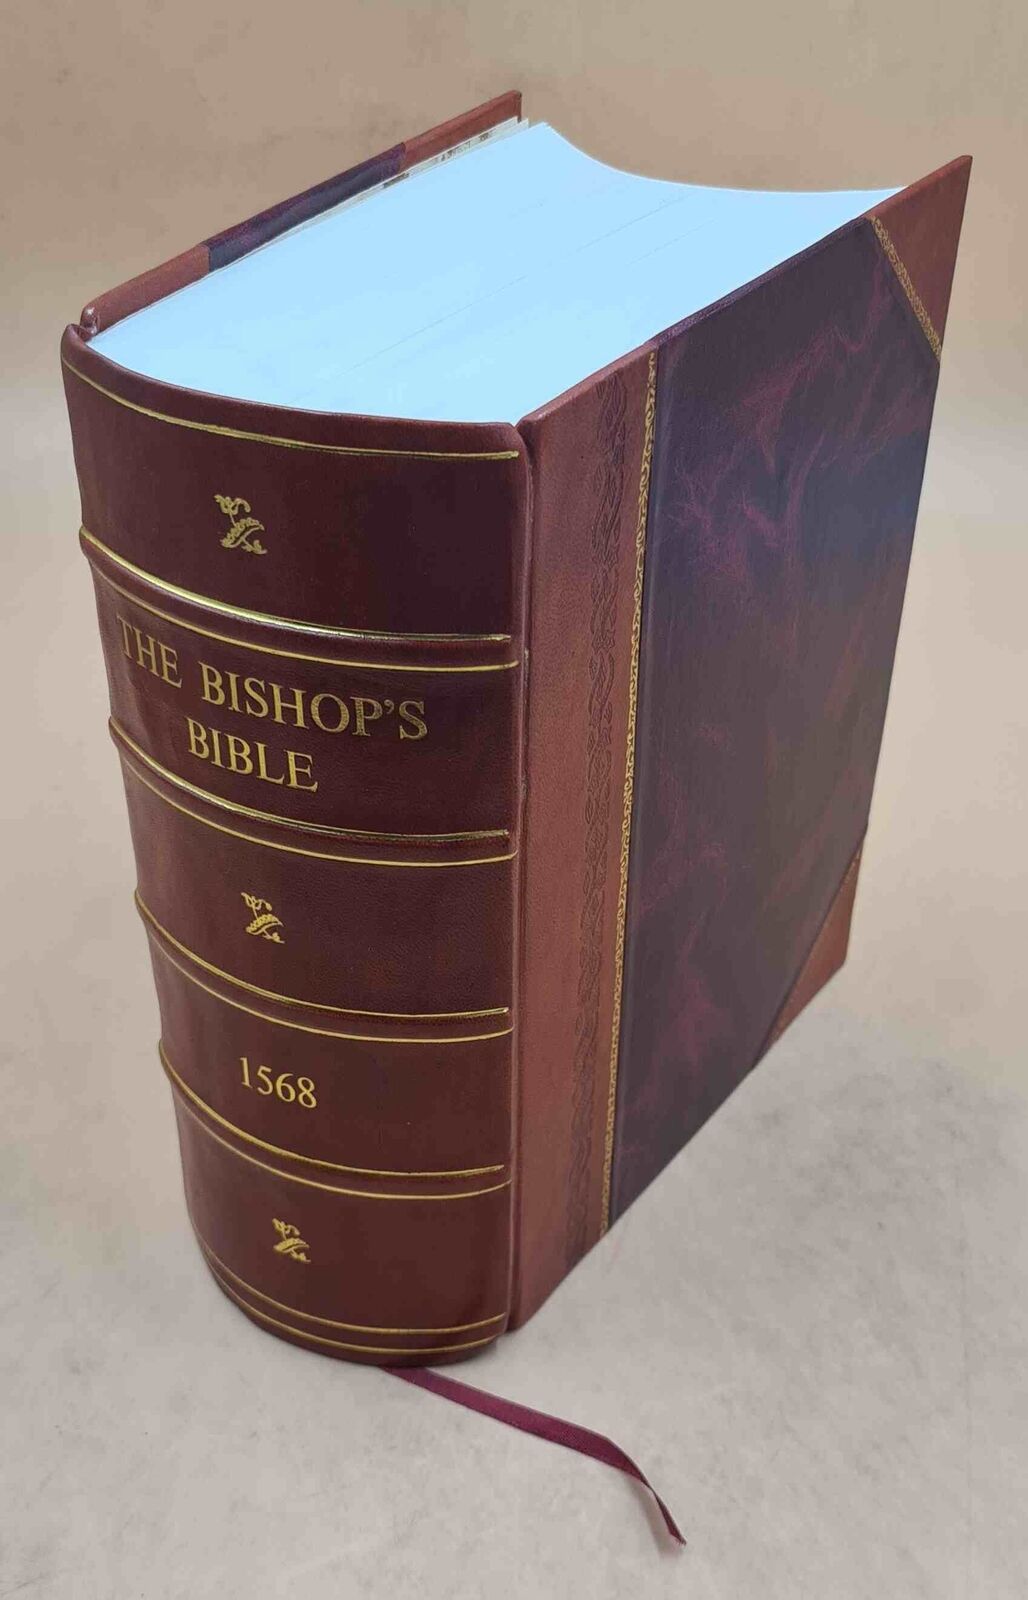 1568 The Bishop's Bible [LEATHER BOUND]